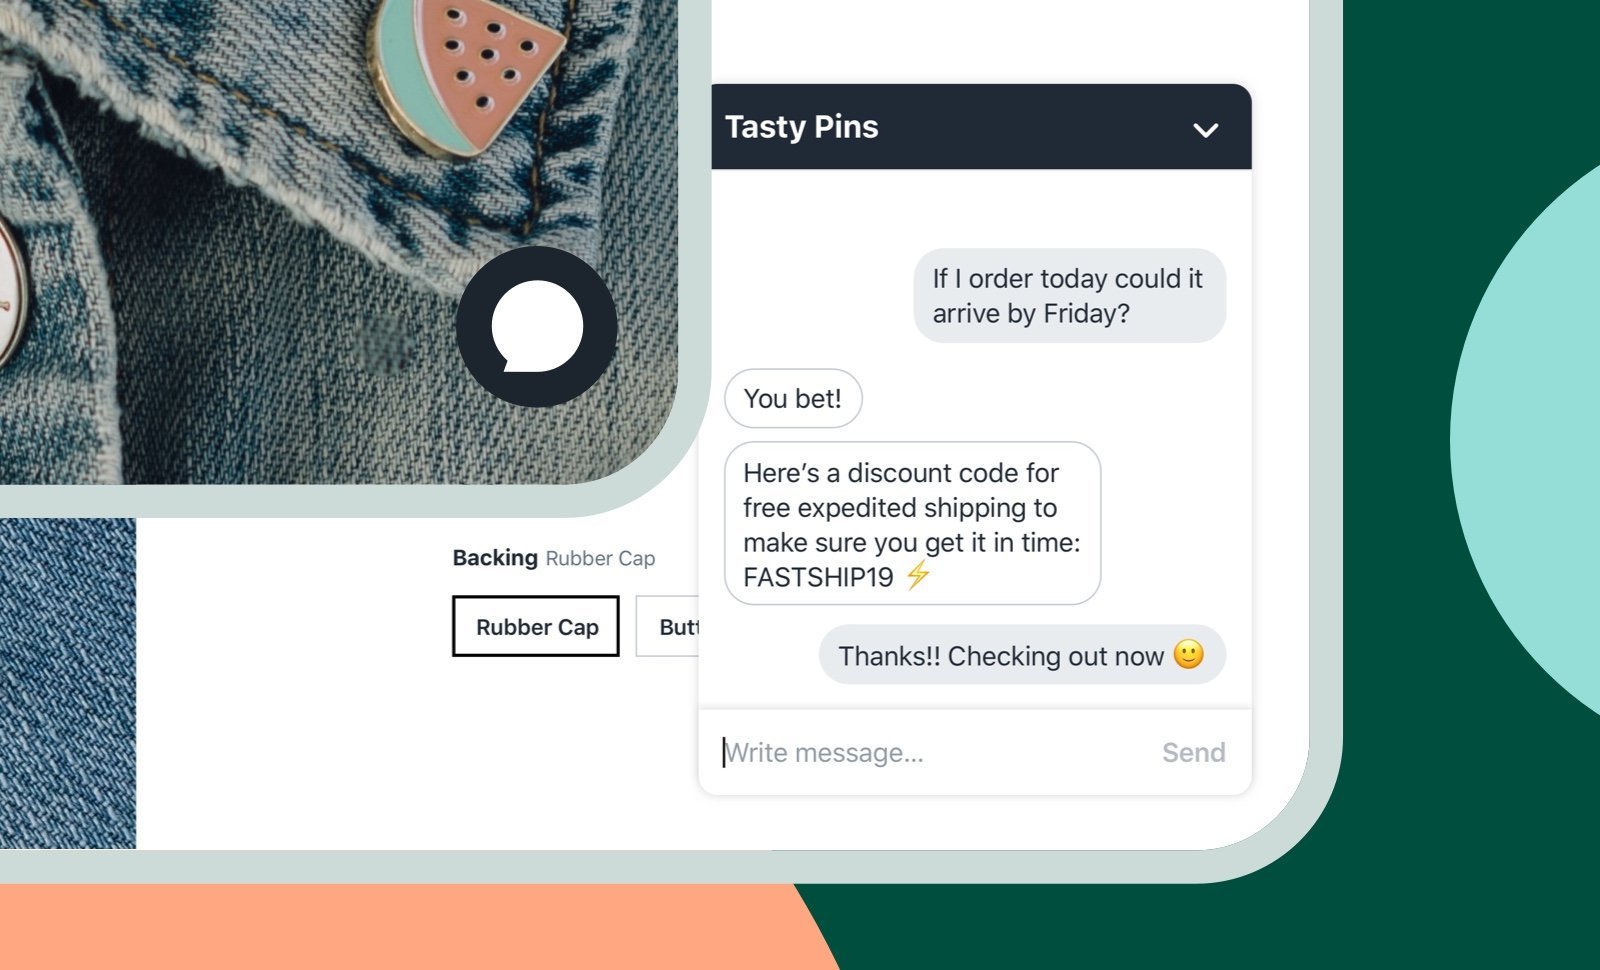 Shopify store marketing strategy: Integrate The Live Chat And Chatbot Option For Customer Experience